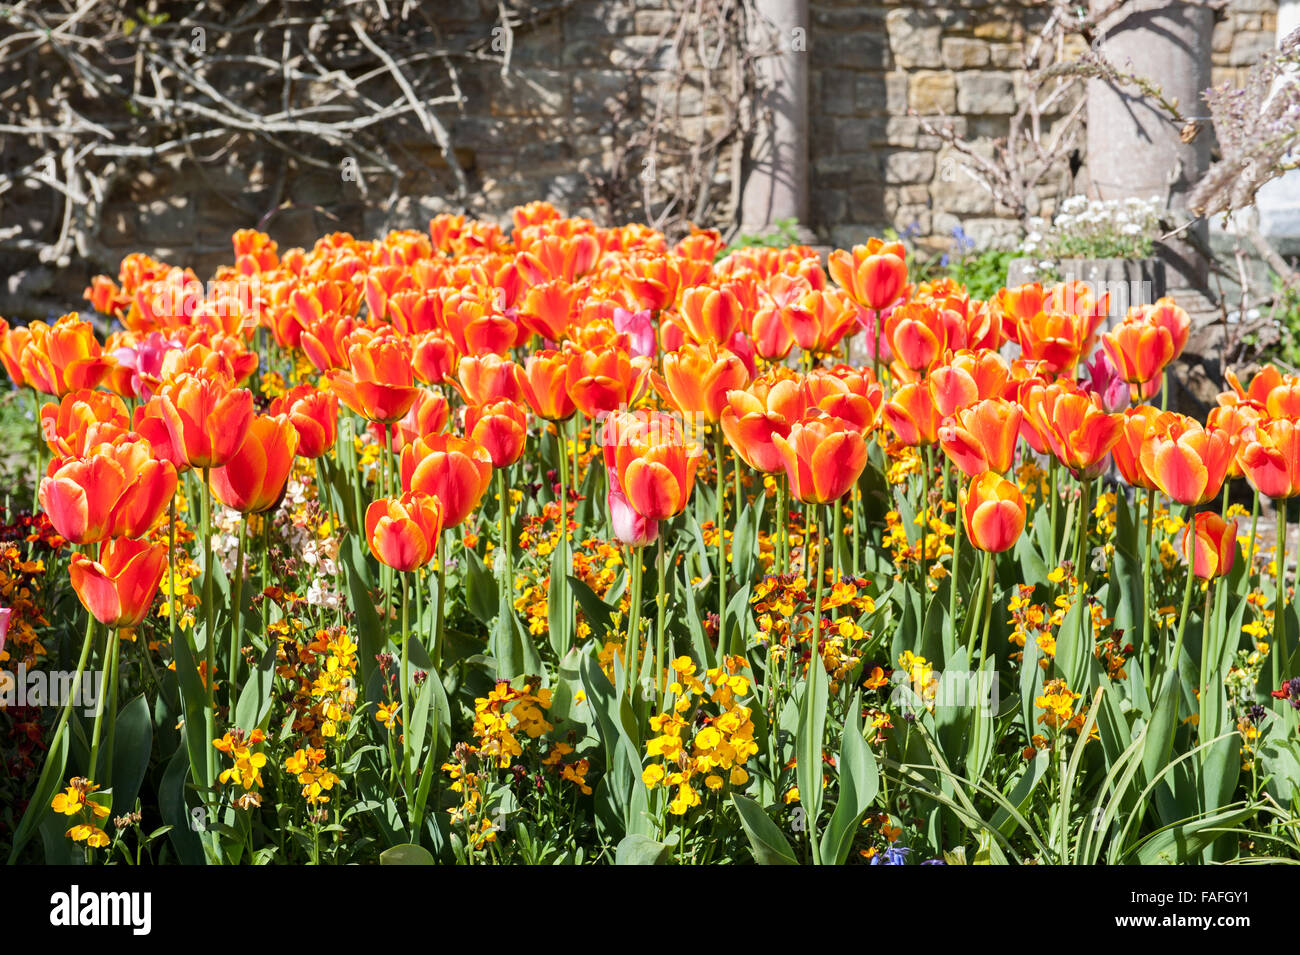 Red and yellow Tulips in garden bed in summer Stock Photo